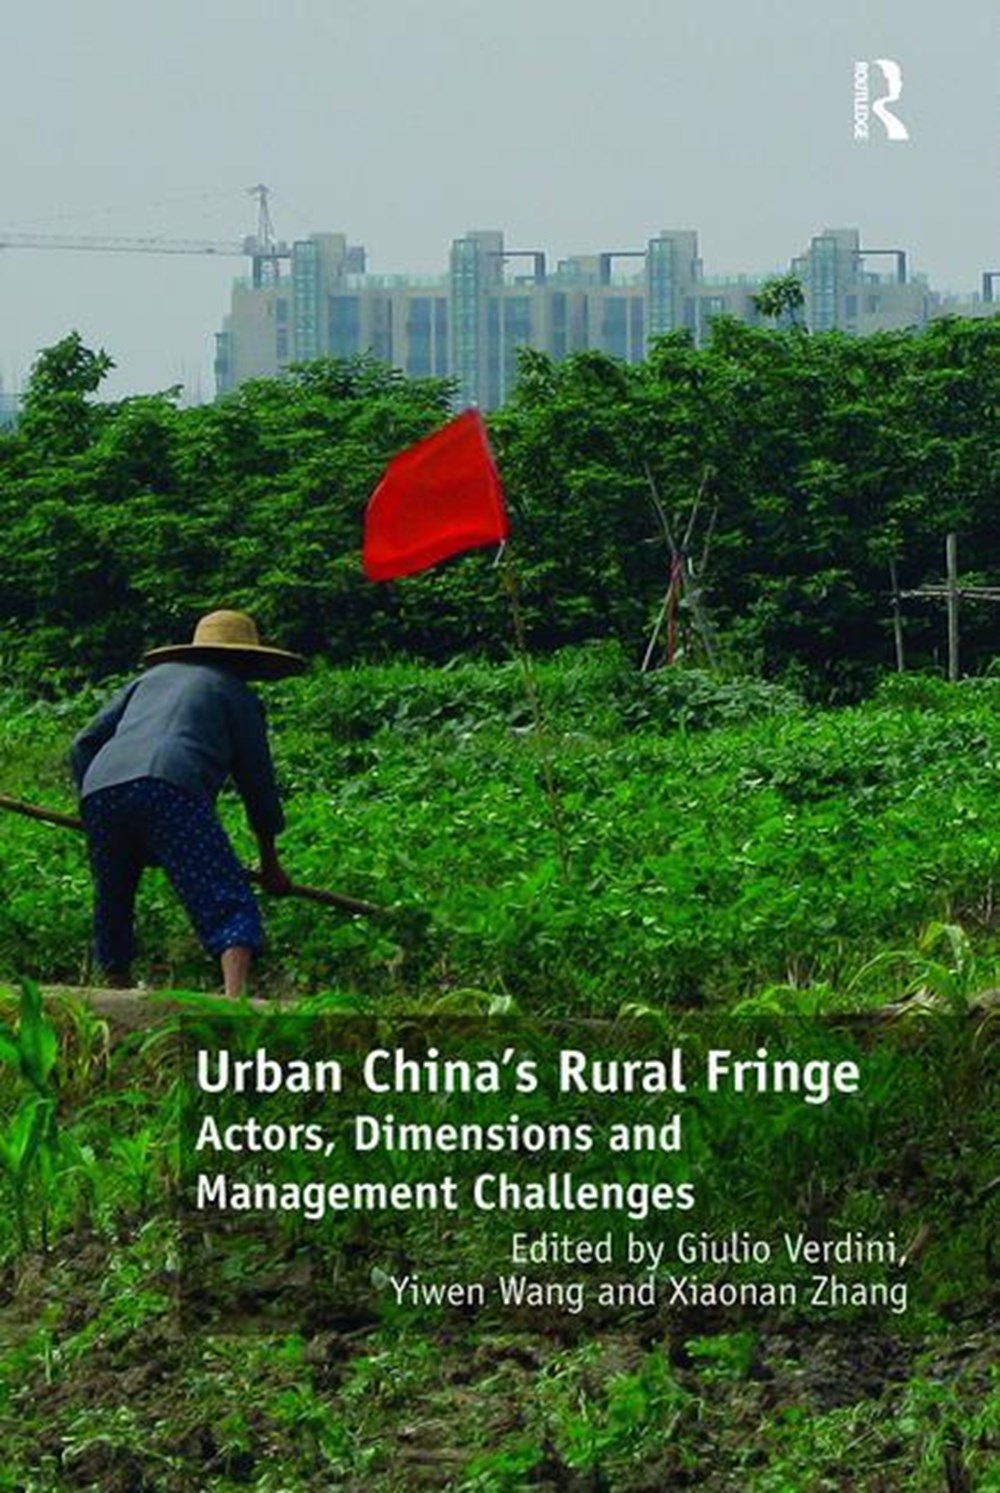 Urban China's Rural Fringe: Actors, Dimensions and Management Challenges